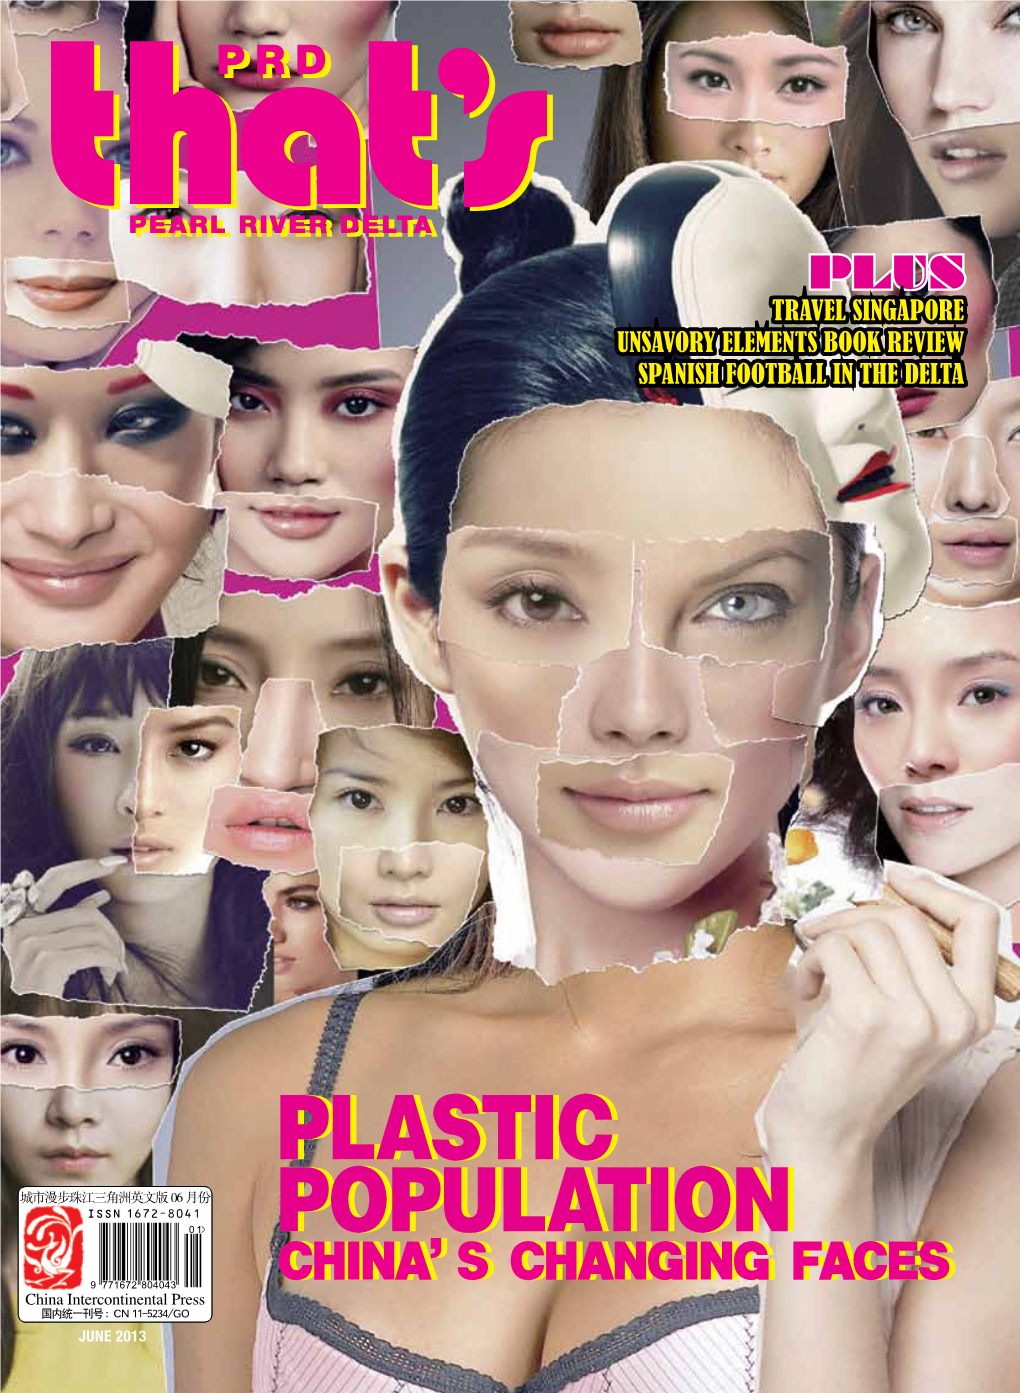 Plastic Population China’S Changing Faces by Stephen George